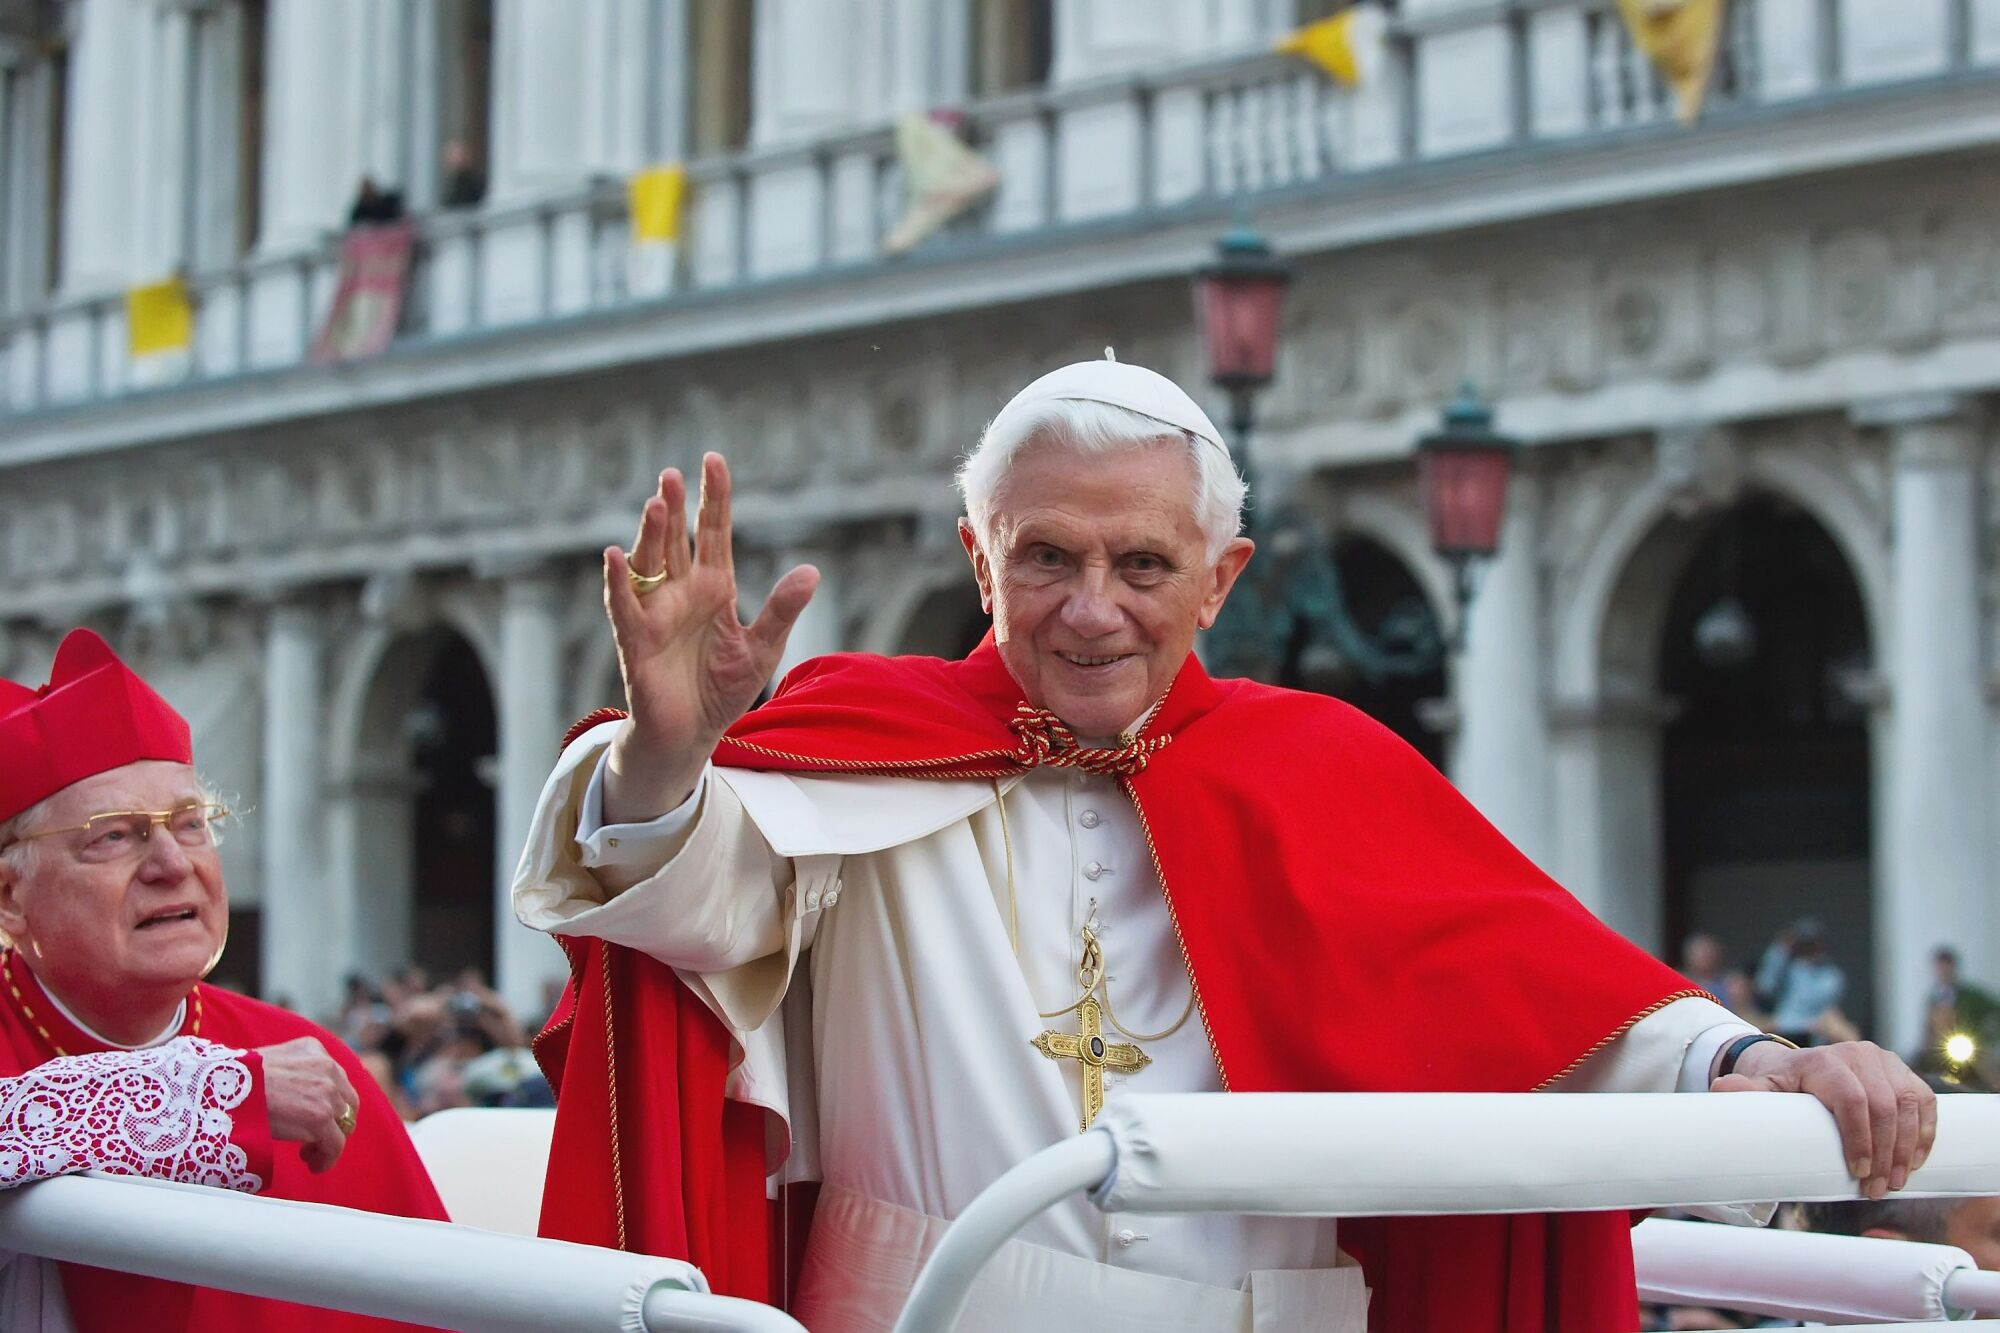 Pope Benedict XVI  waves from a vehicle while another passenger looks on as they drive past a building.